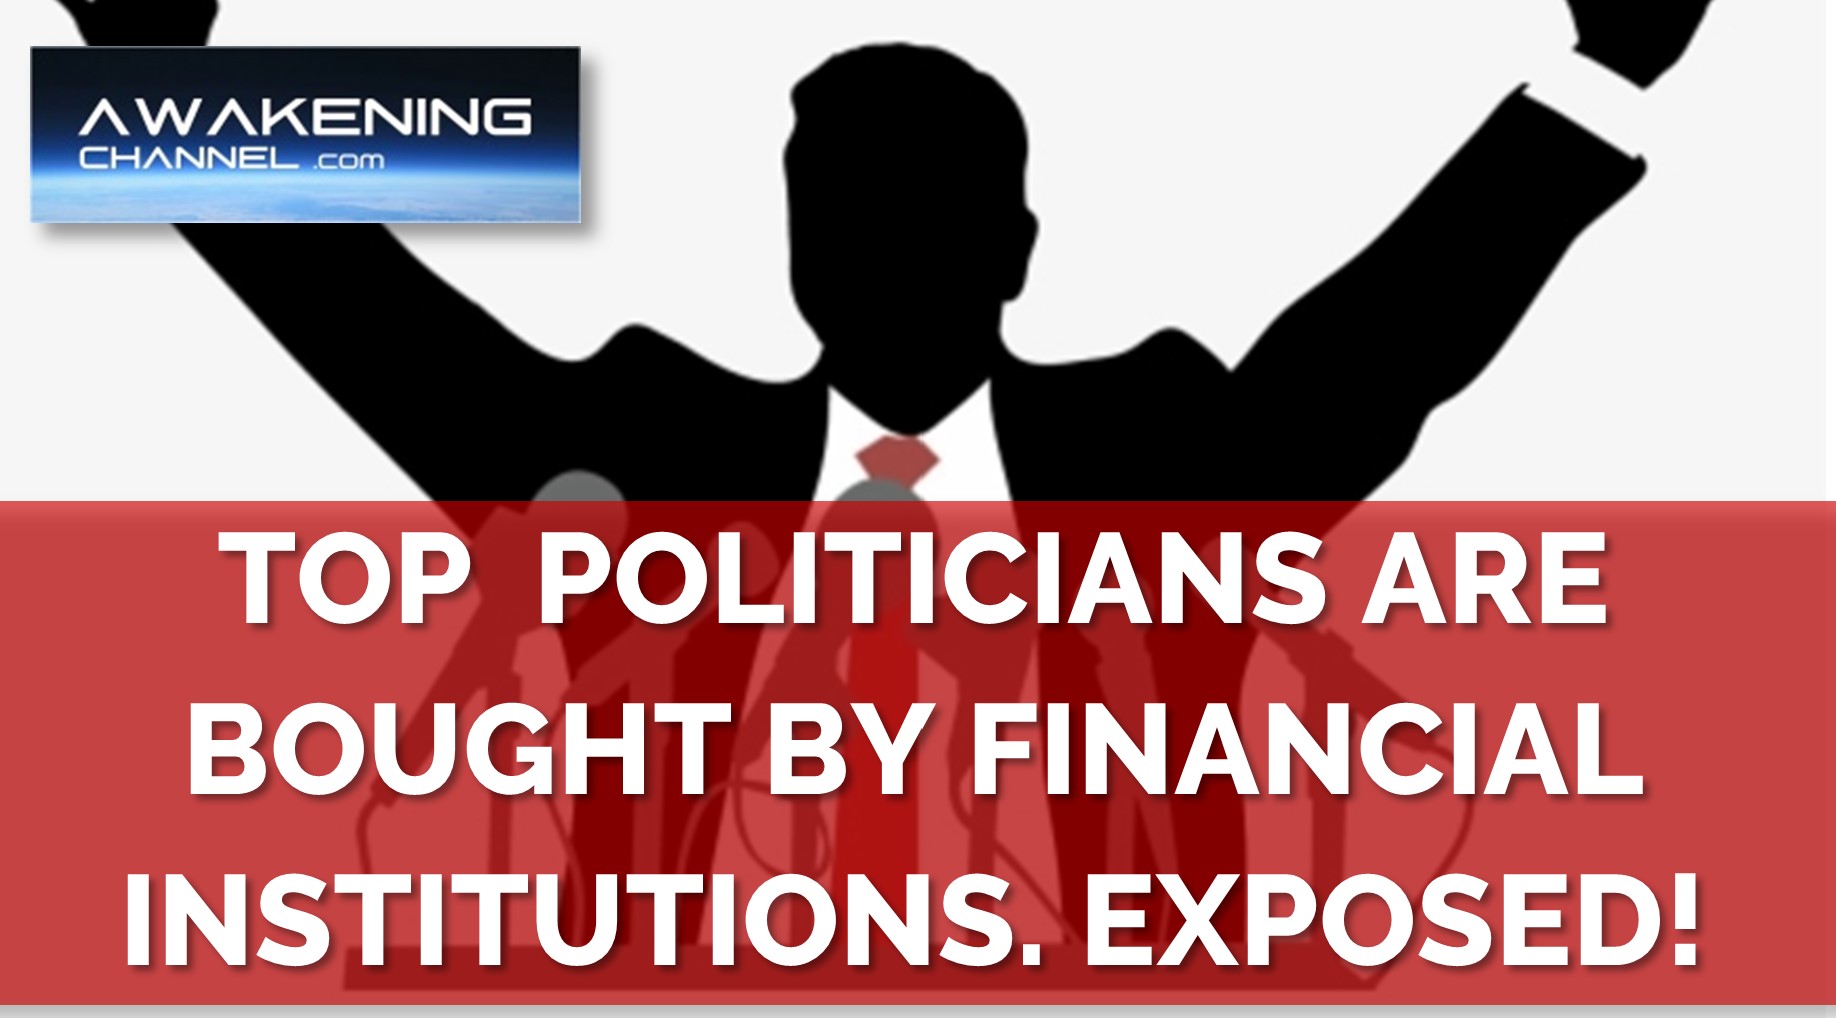 Exposed! Top Politicians Are Bought By Financial Institutions